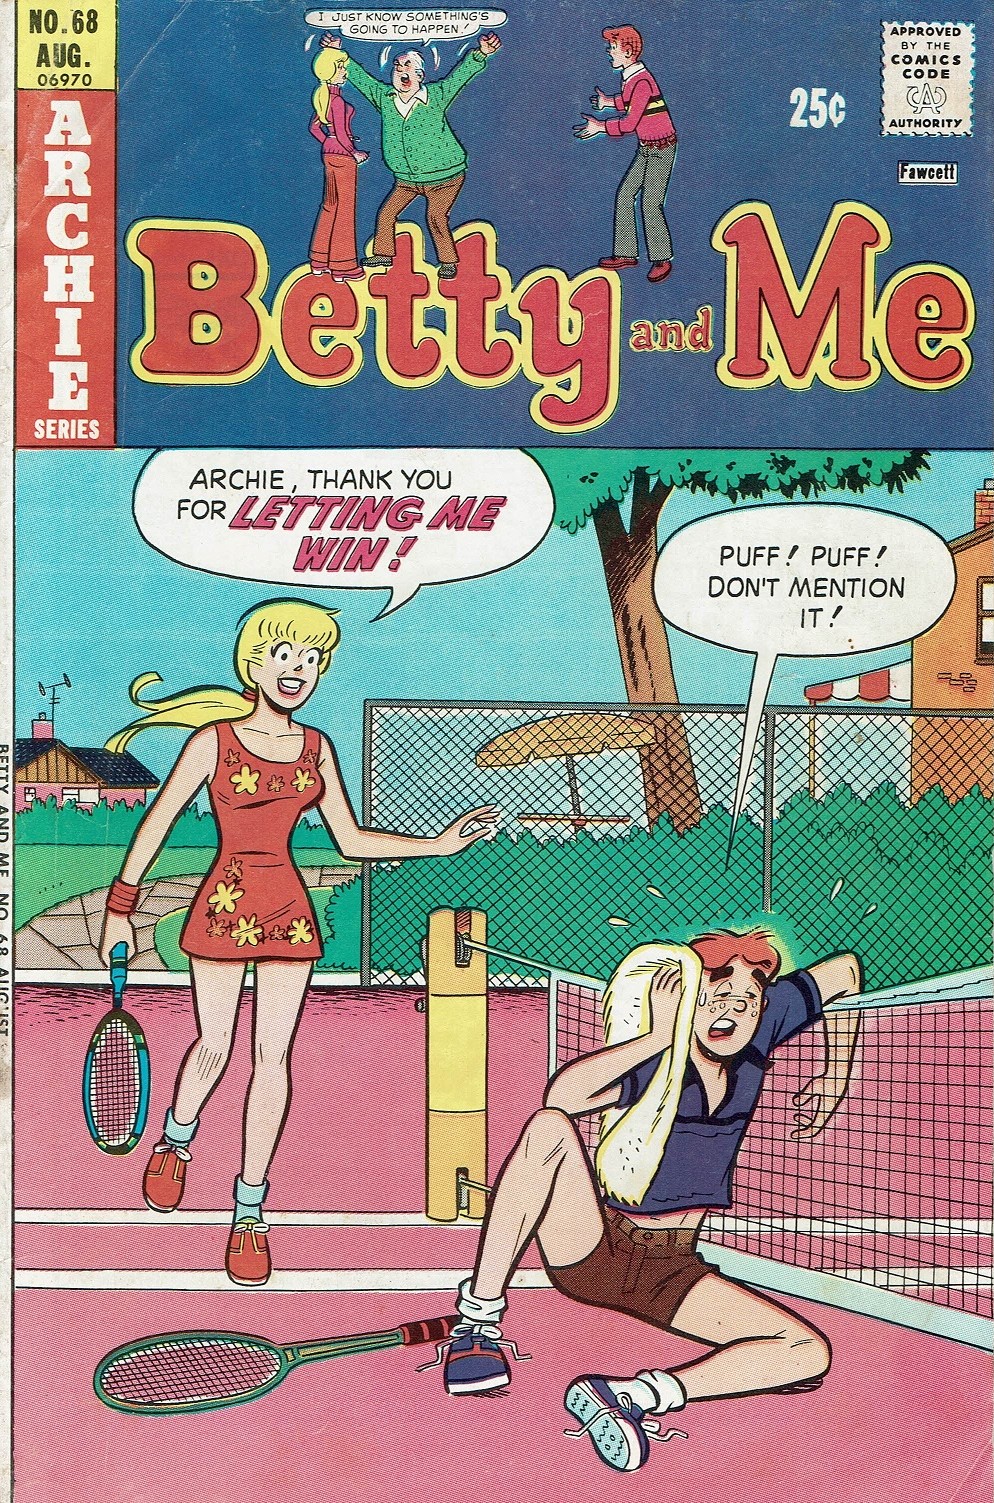 Read online Betty and Me comic -  Issue #68 - 1